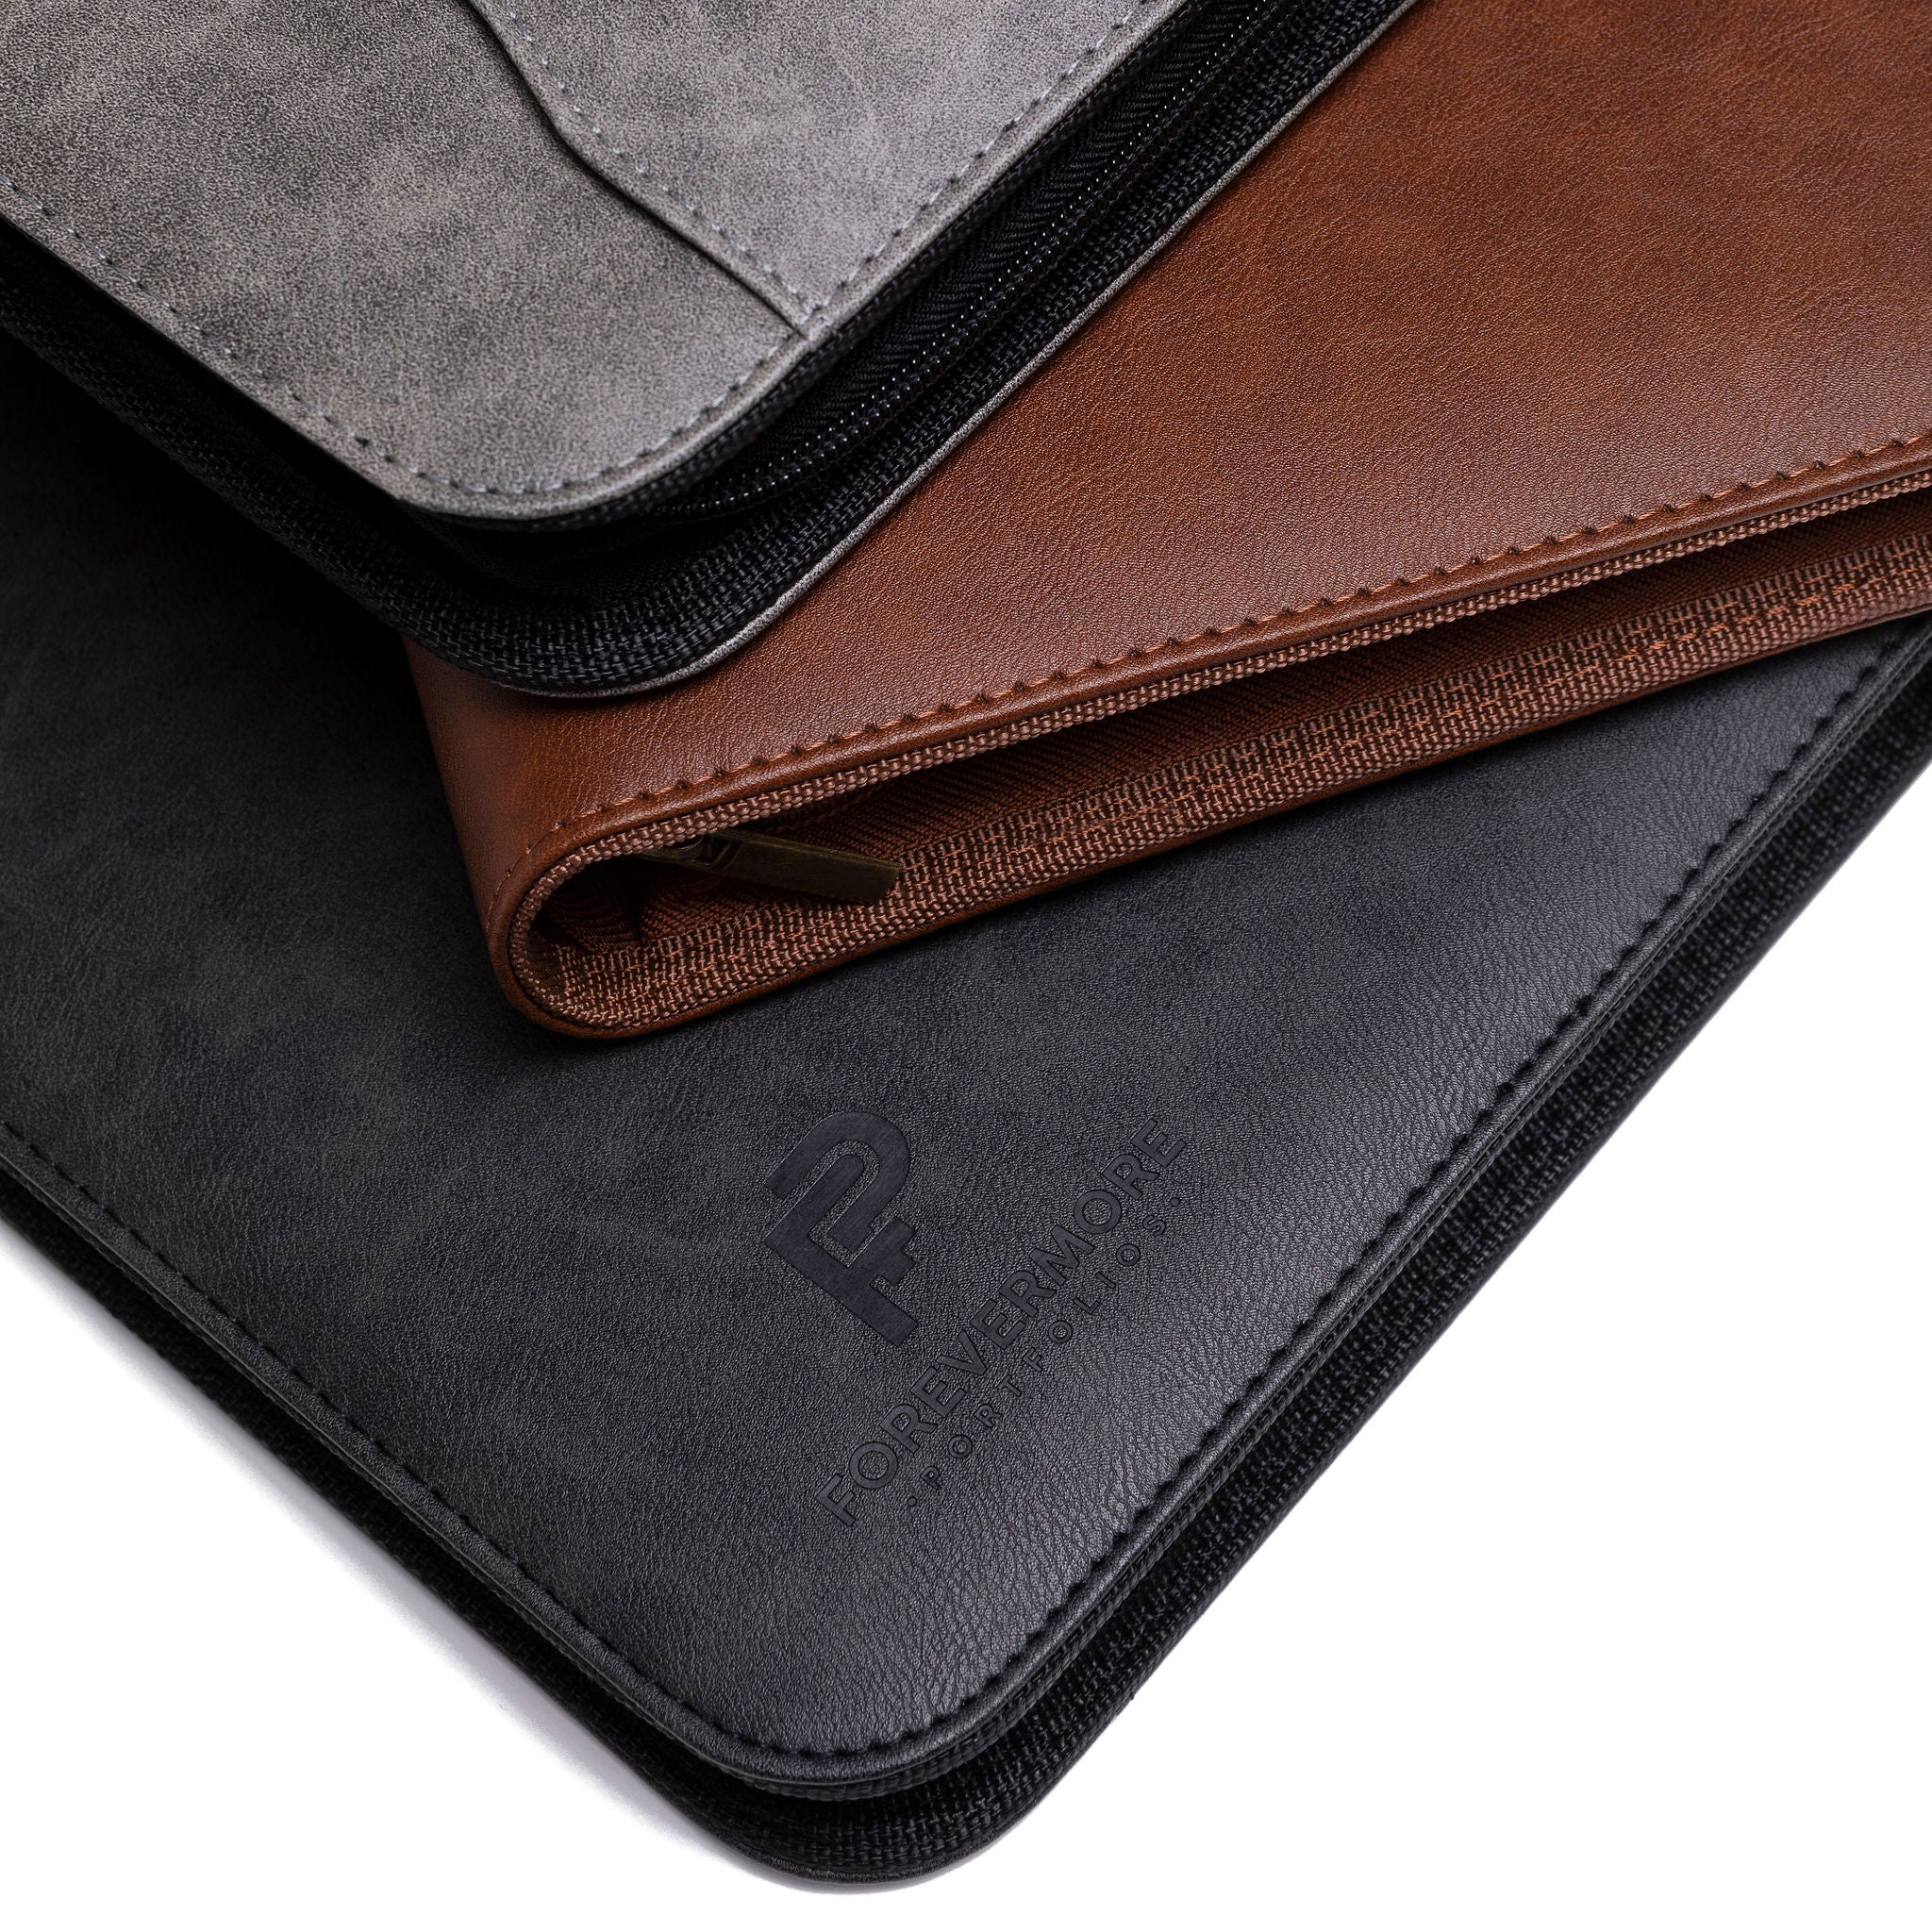 Zippered Portfolio Crazy Horse Leather Portfolio with 3-Ring Binder for A4 Documents and Surface Pro 4 / New Surface Pro